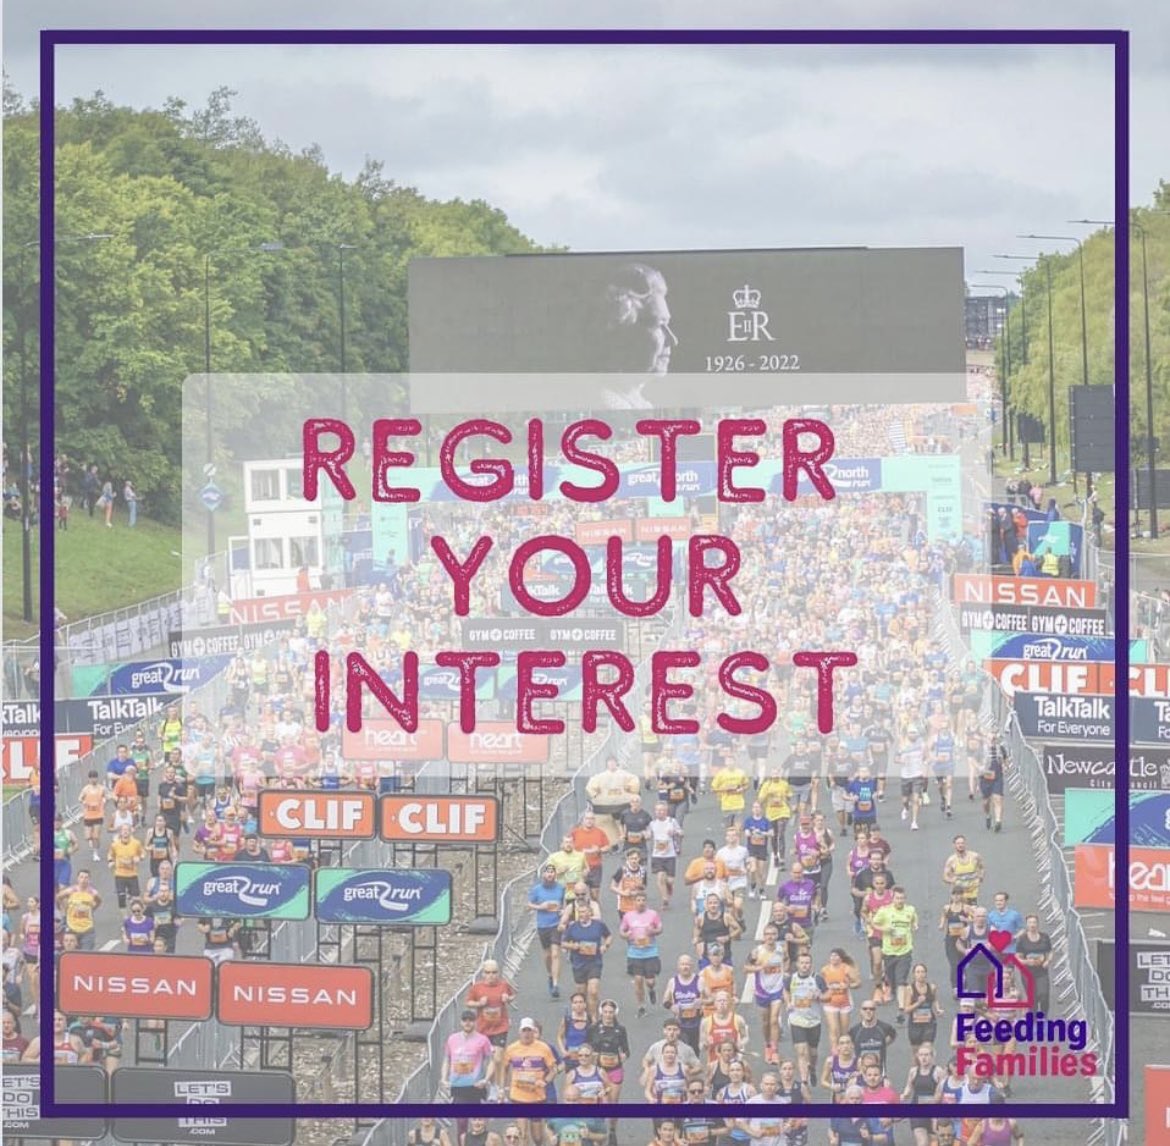 REGISTER YOUR INTEREST to Come and run the @Great_Run with us We only have 15 Ballot Spaces for our supporters to run the race to raise essential funds for Feeding Families. Register below to be the first to know when the spaces are released forms.gle/pJpmbgTmdrcTct…